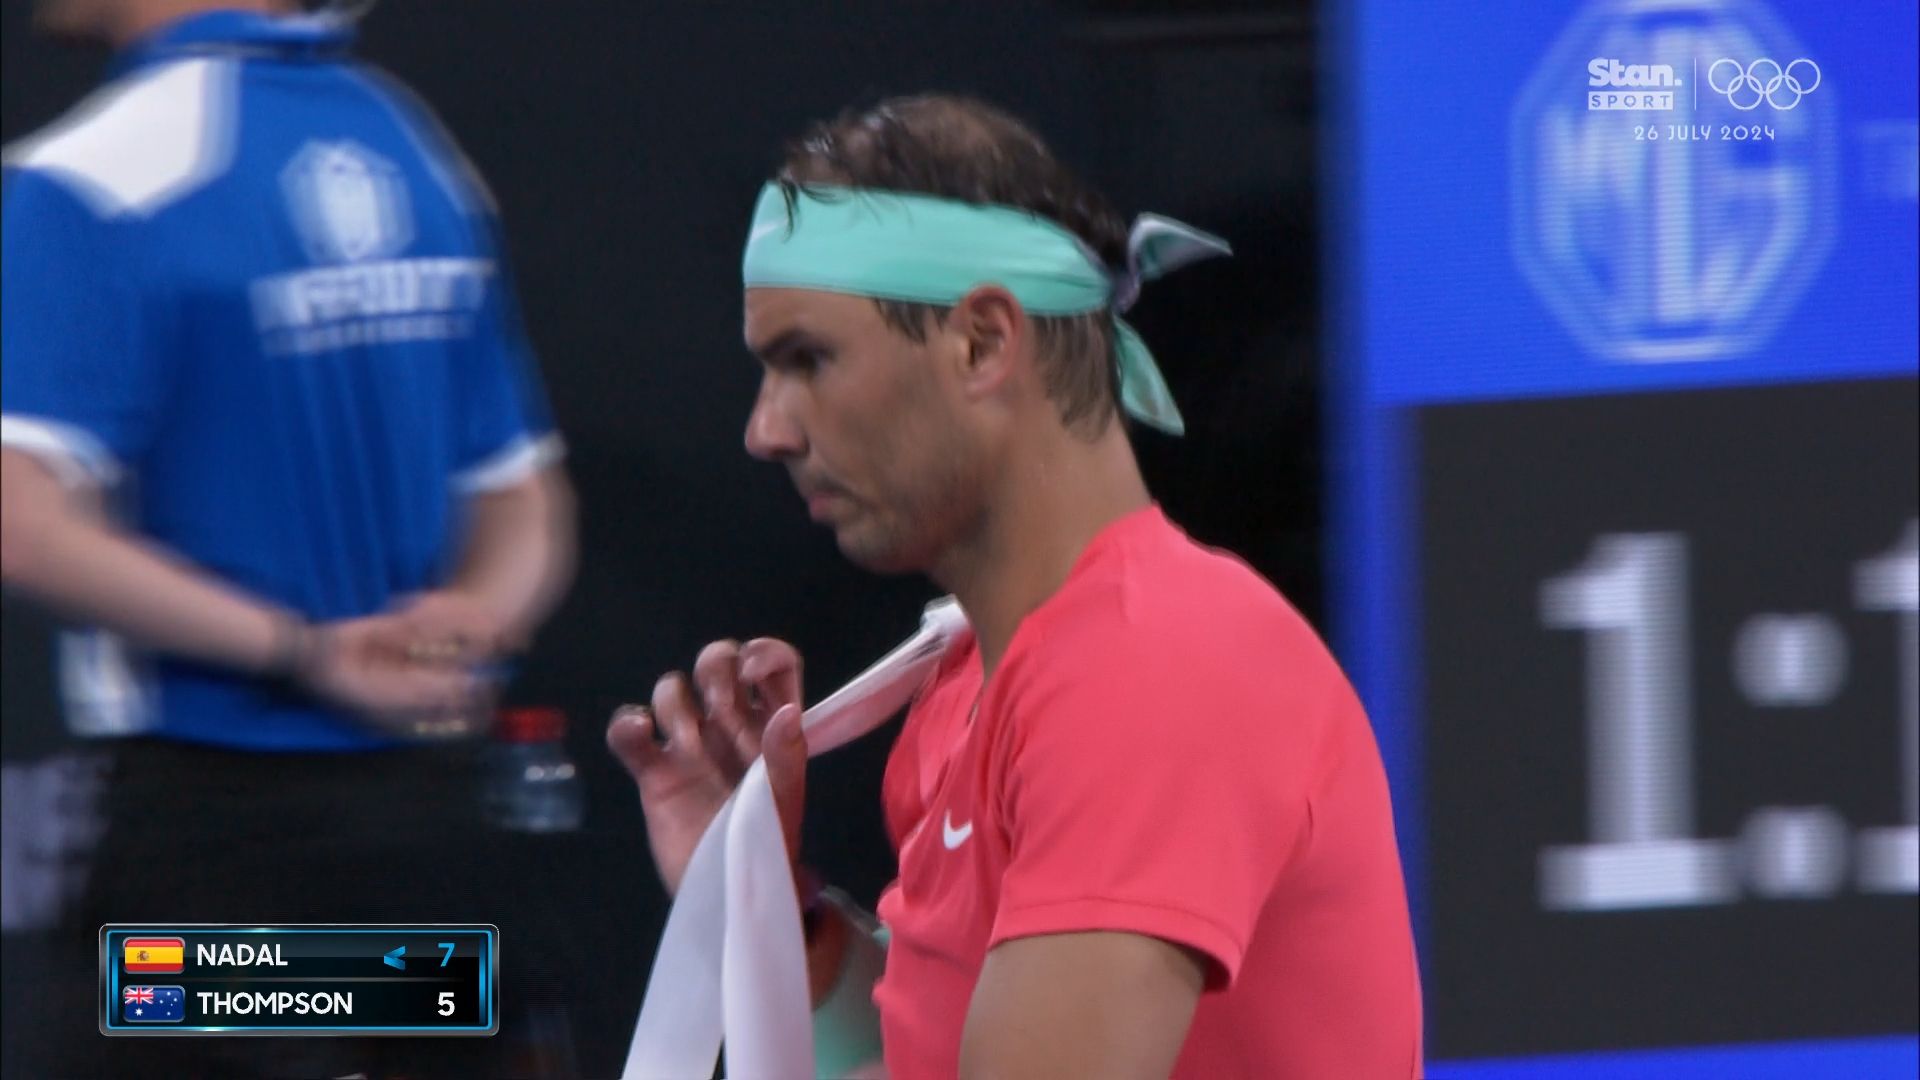 Rafael Nadal survives time violation after another close call with toilet break